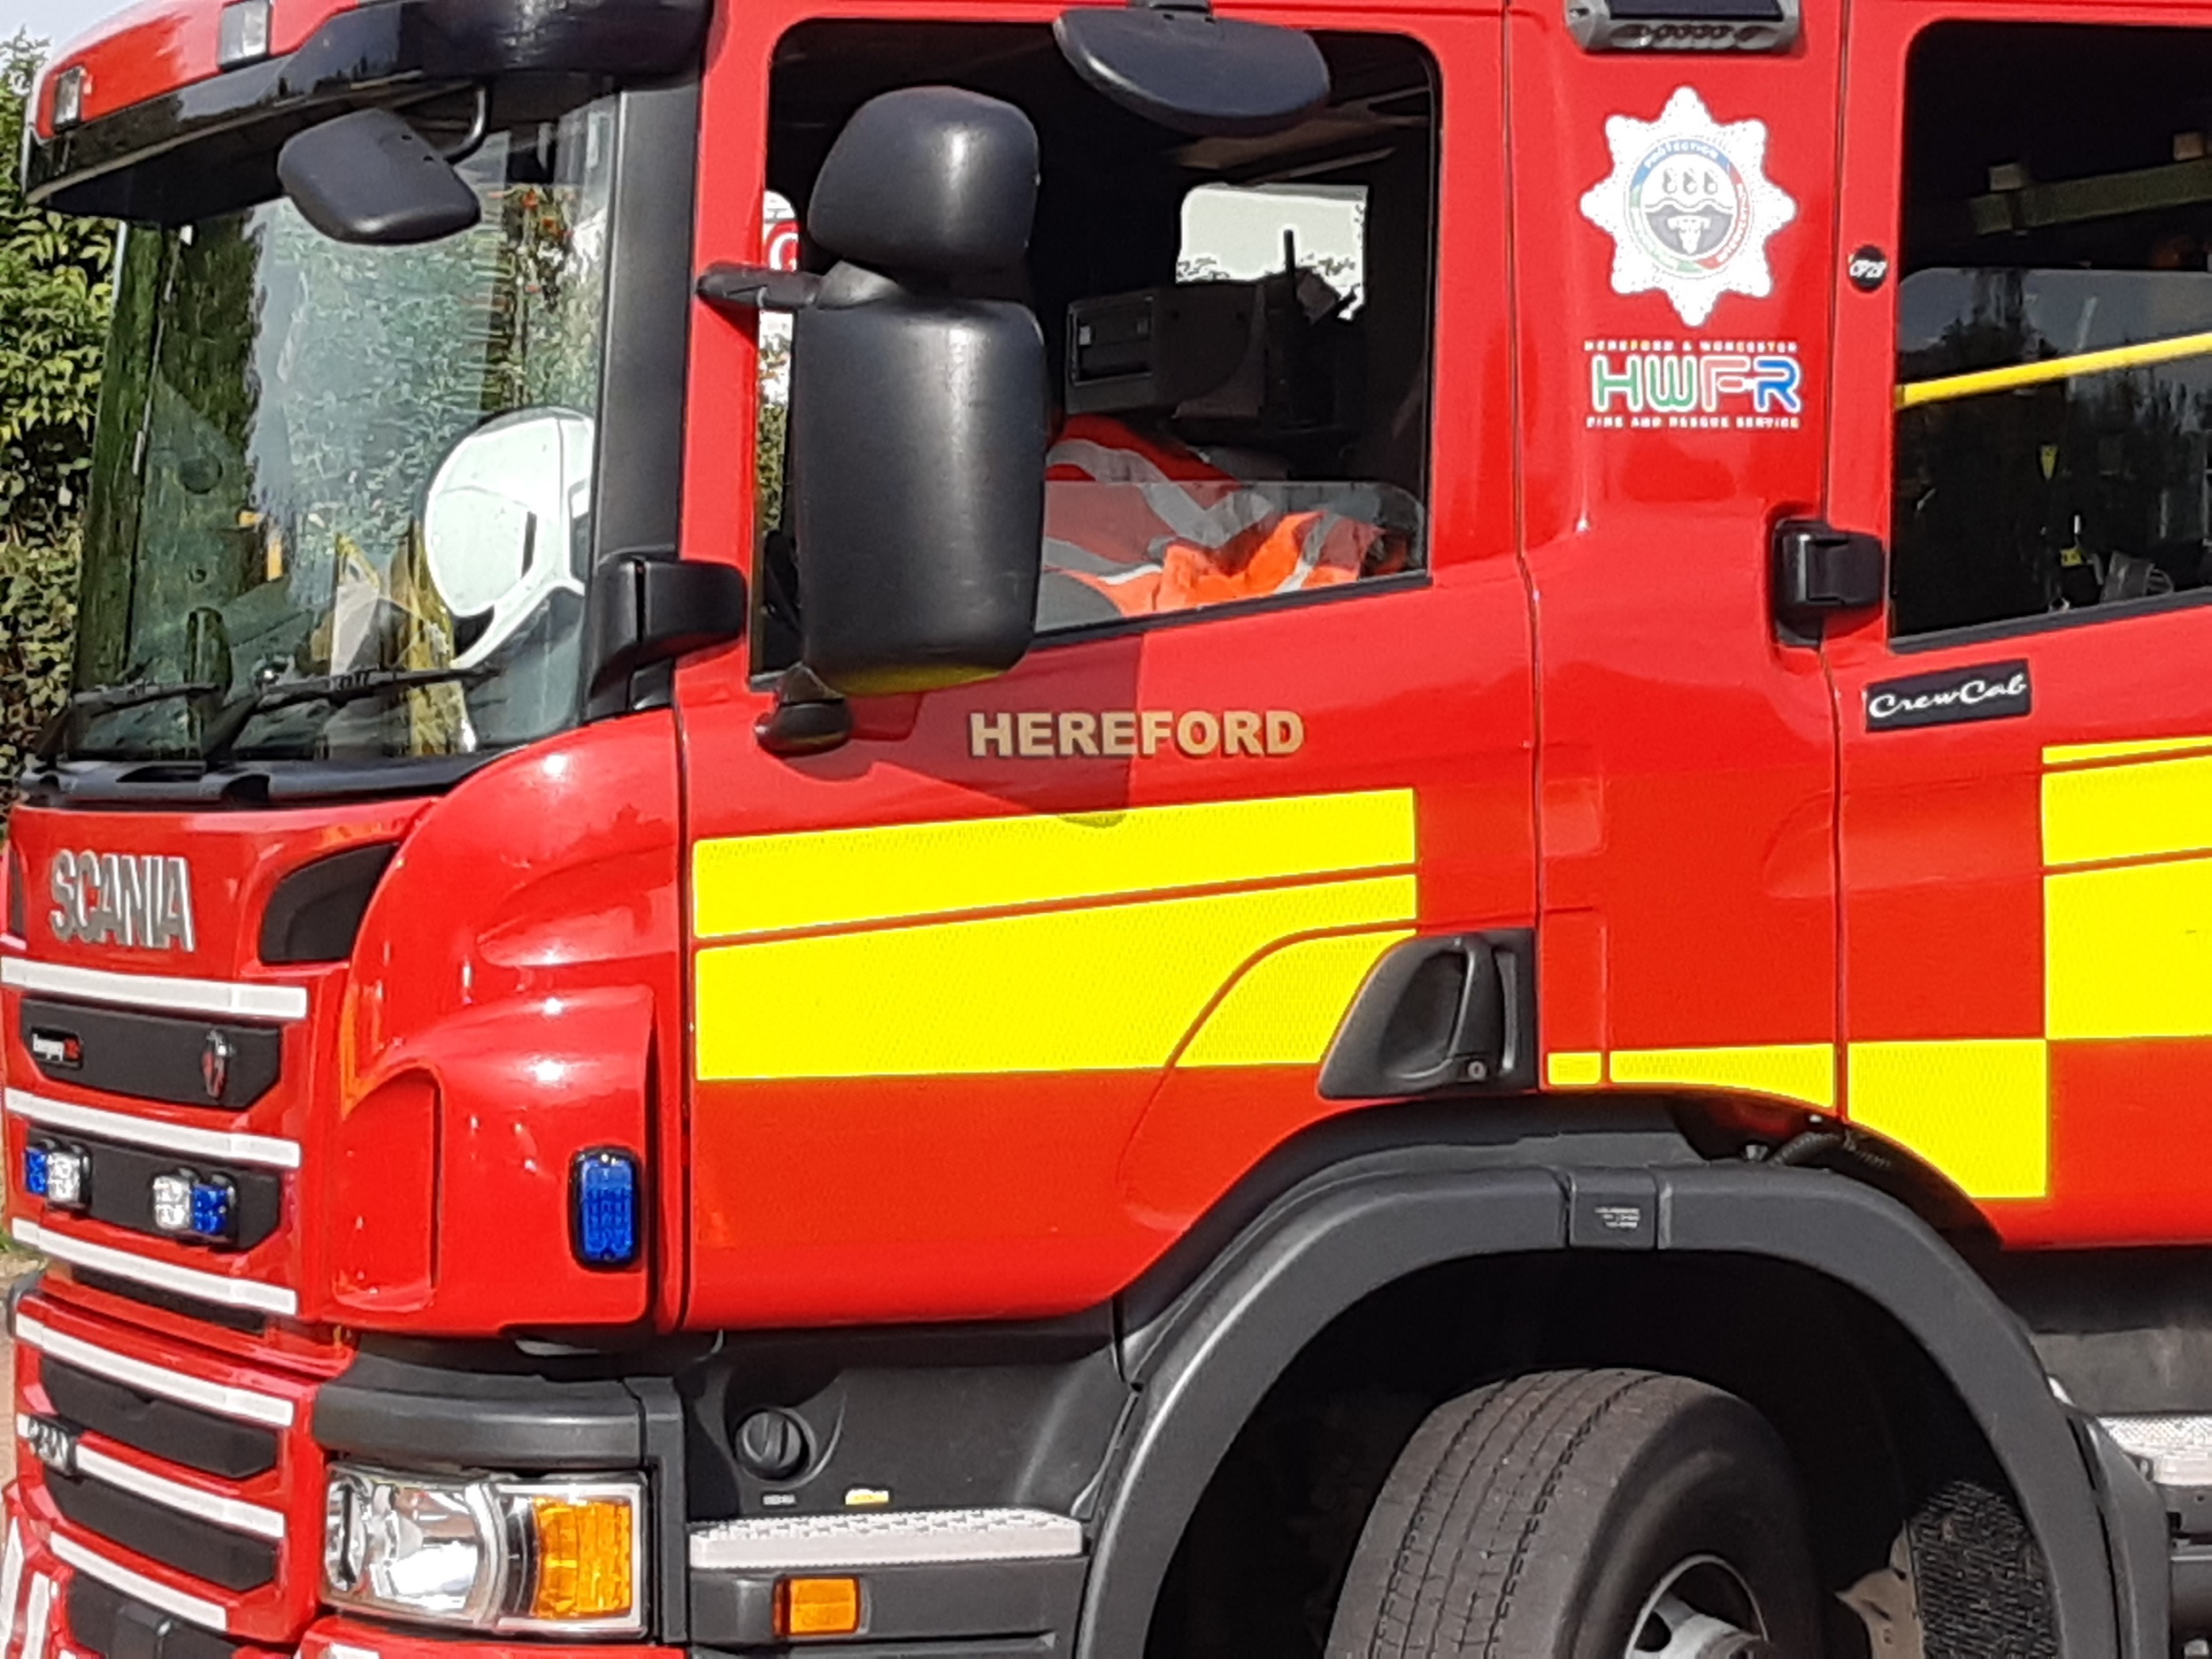 Four crews tackle building fire near Hereford